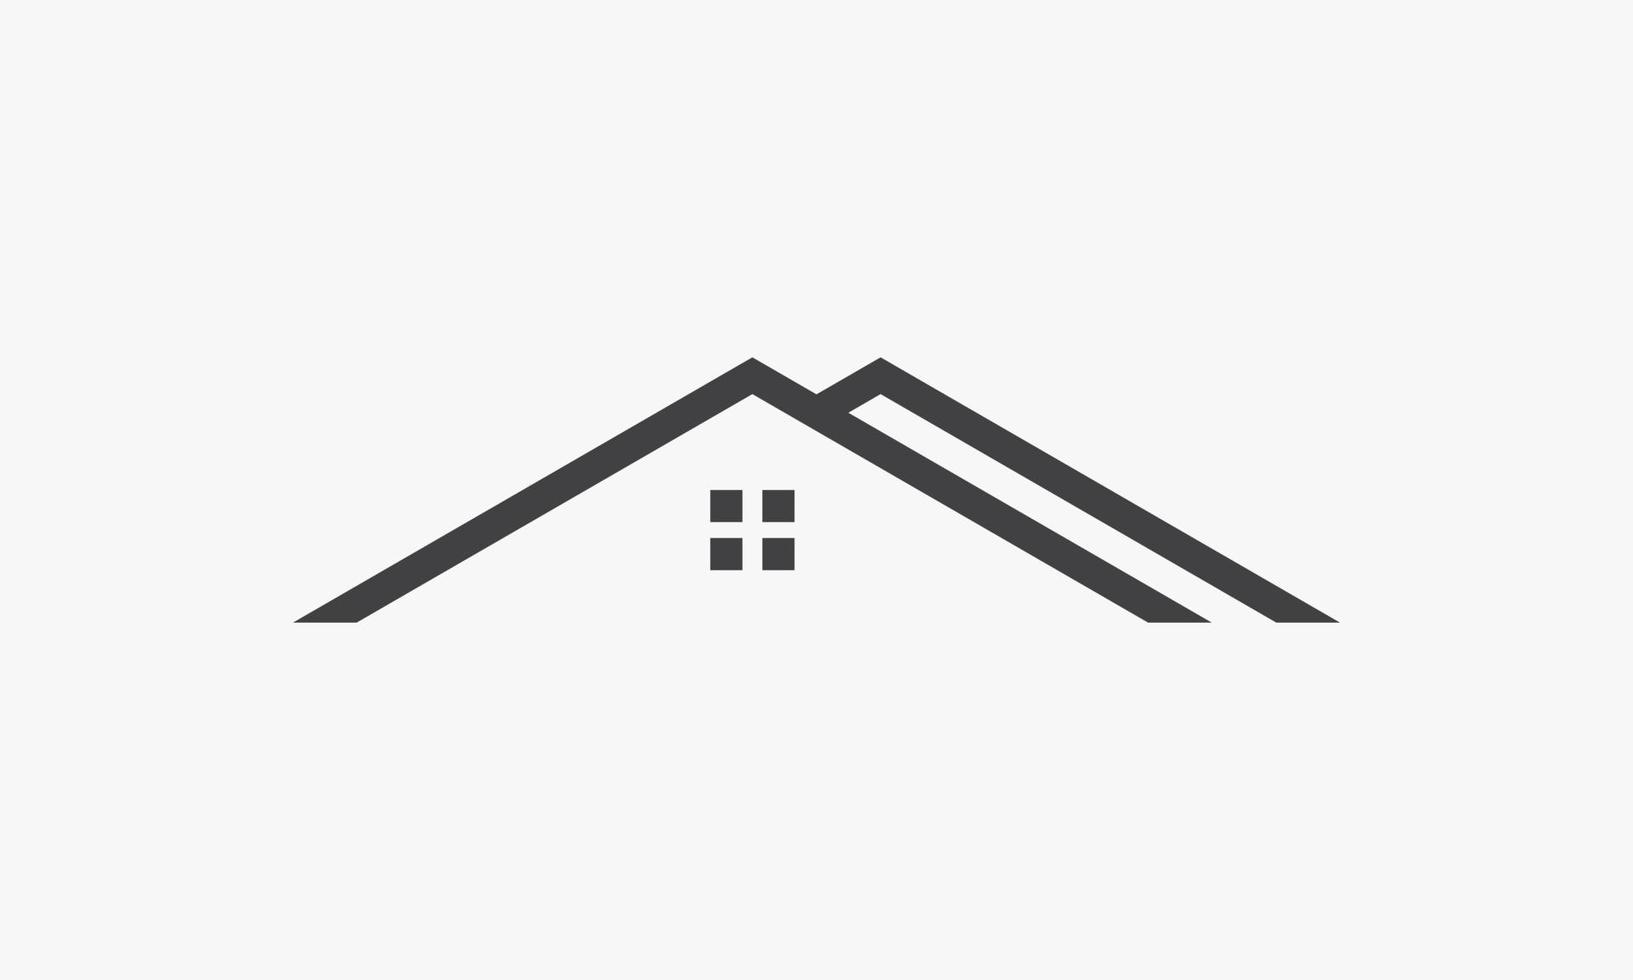 roof home  icon design flat vector illustration. isolated on white background.